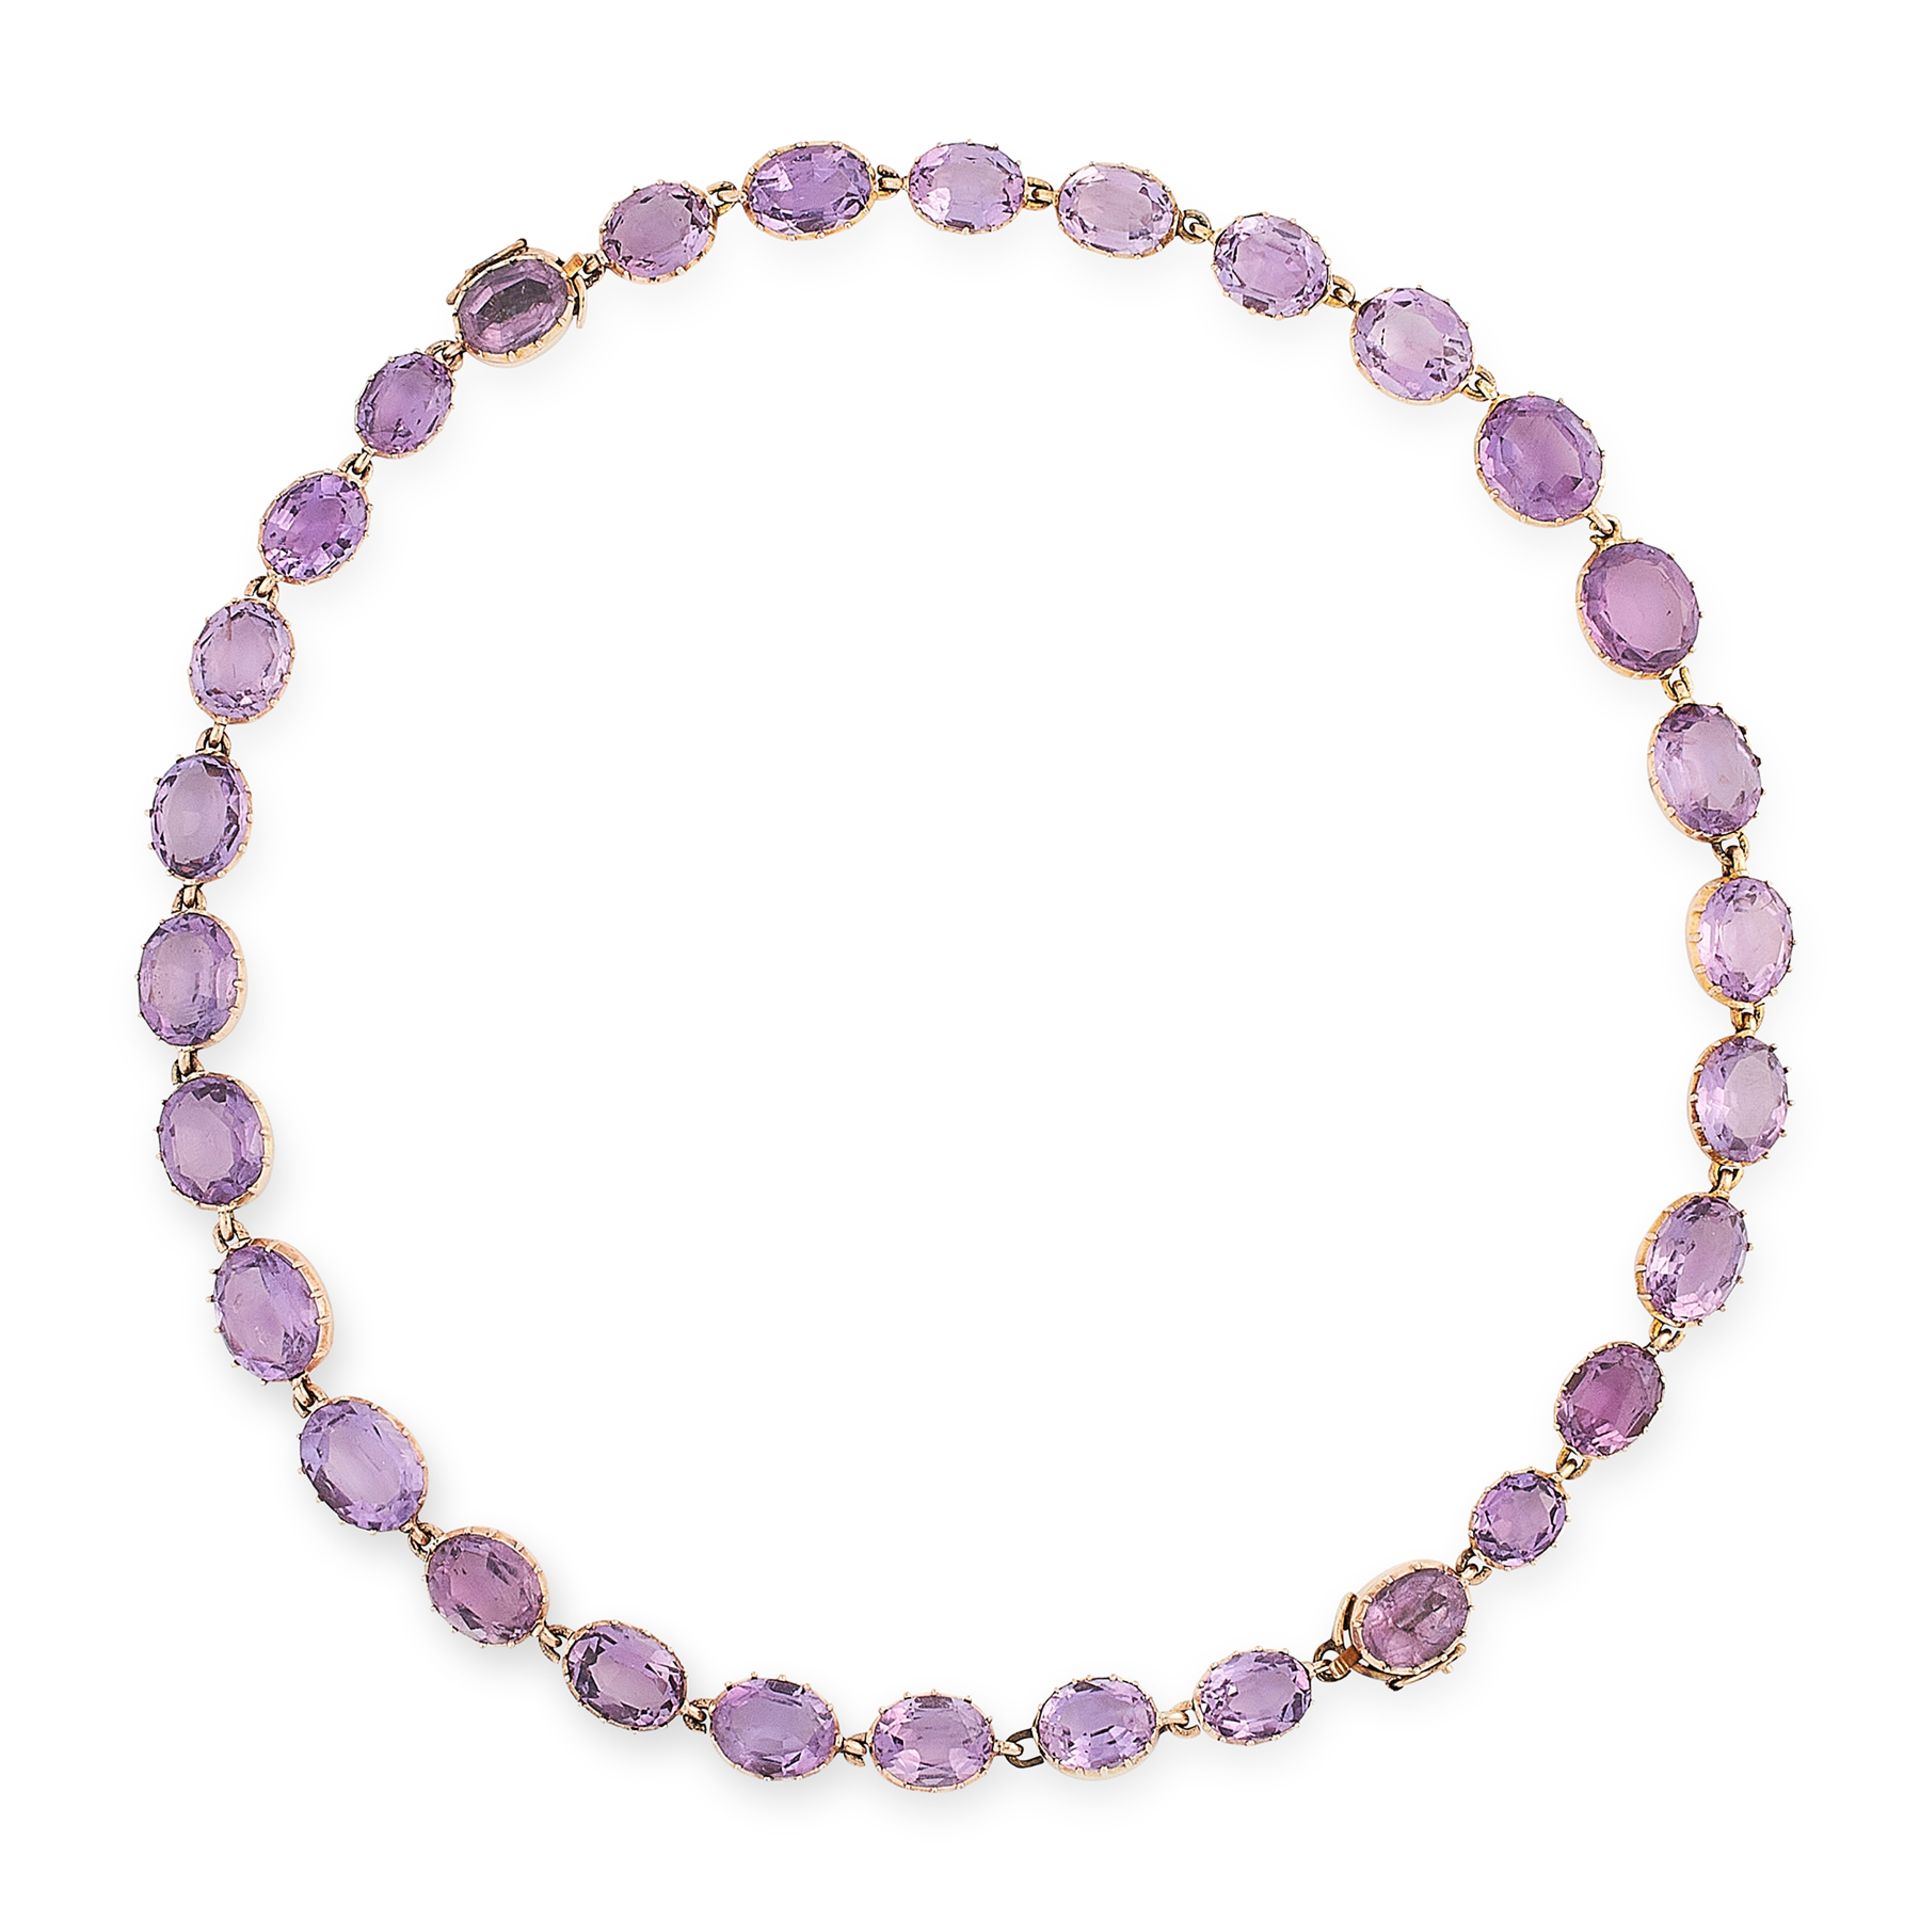 AN ANTIQUE AMETHYST RIVIERE NECKLACE, 19TH CENTURY in yellow gold, comprising a row of thirty oval